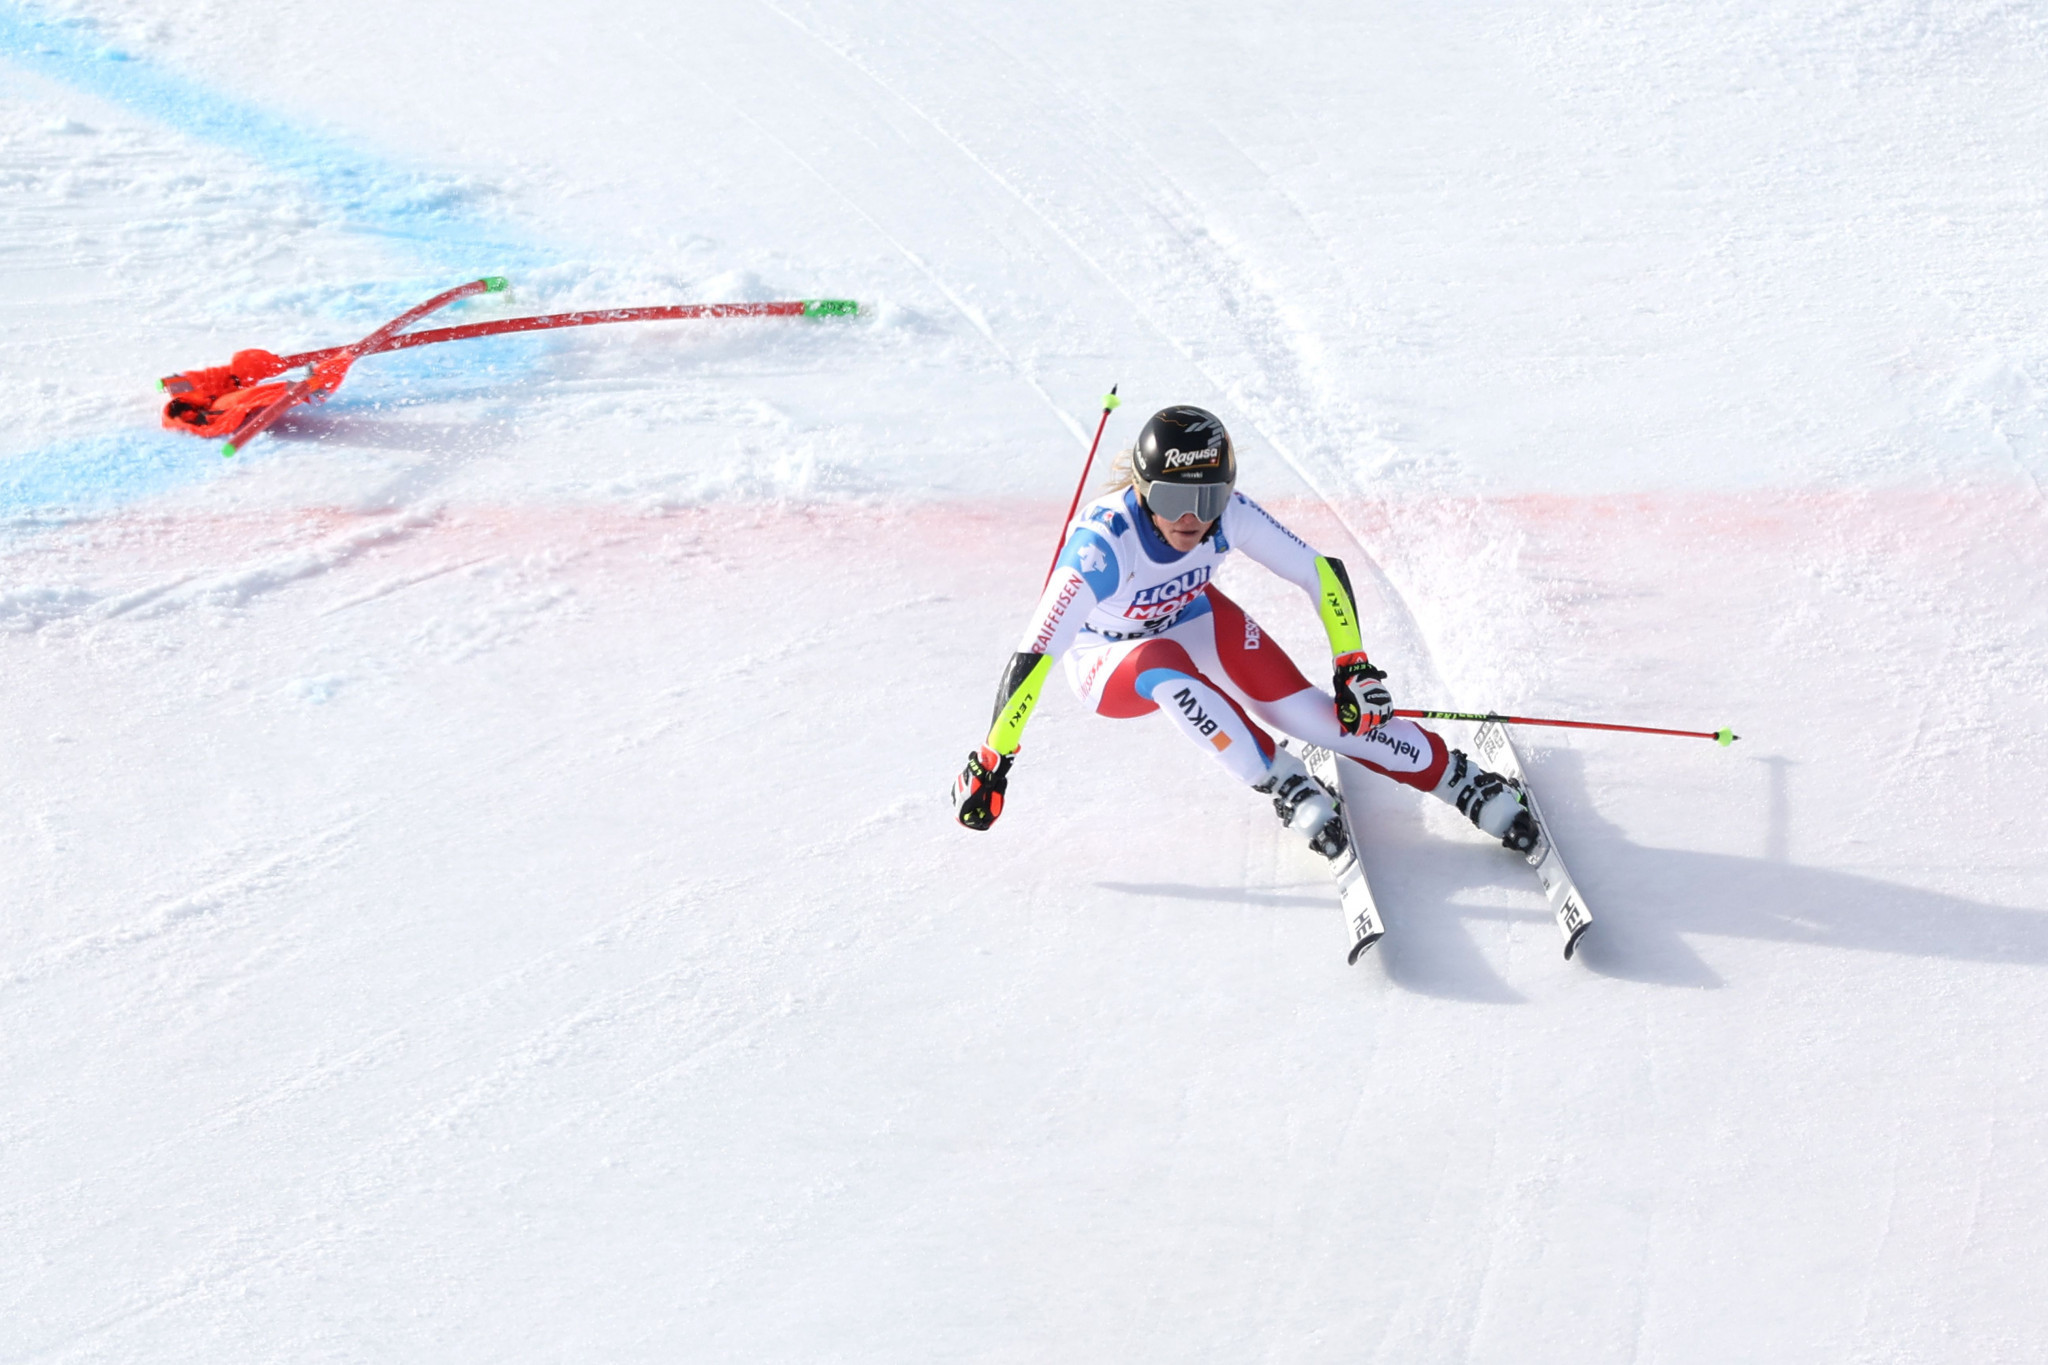 The FIS Alpine Junior World Ski Championships were held in Panorama ©Getty Images